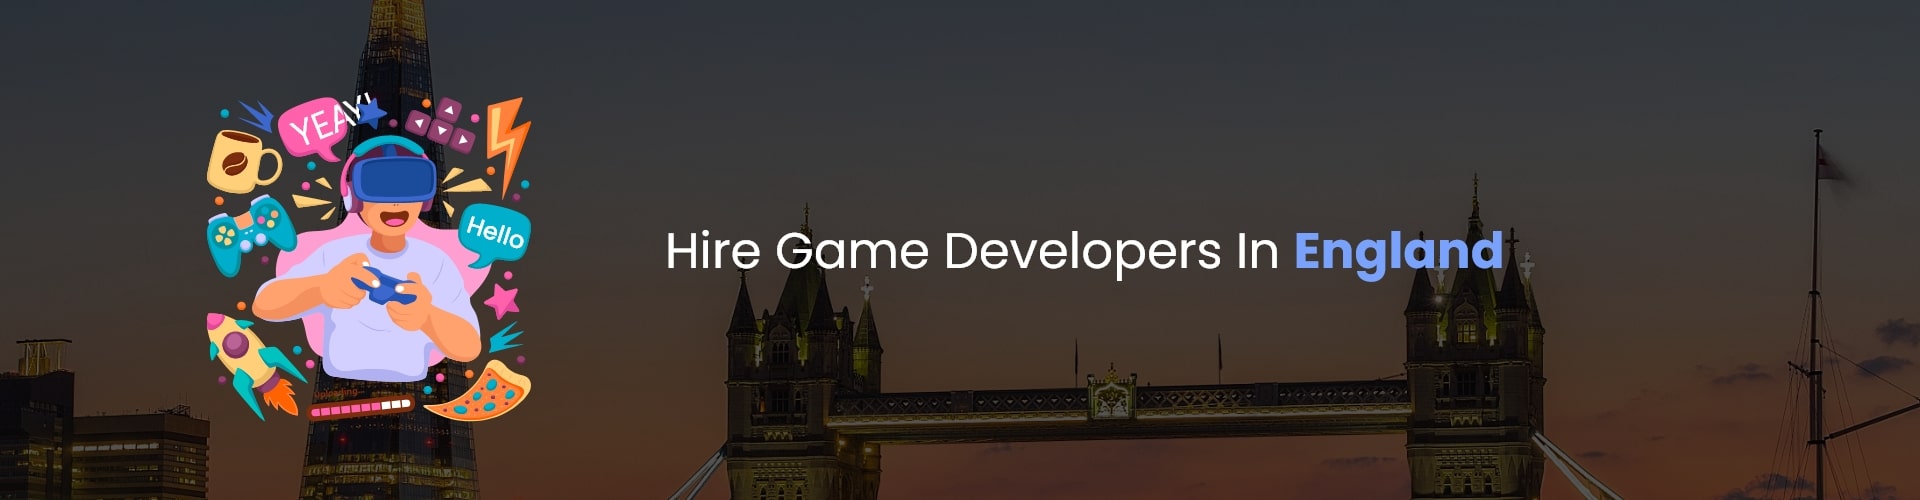 hire game developers in england